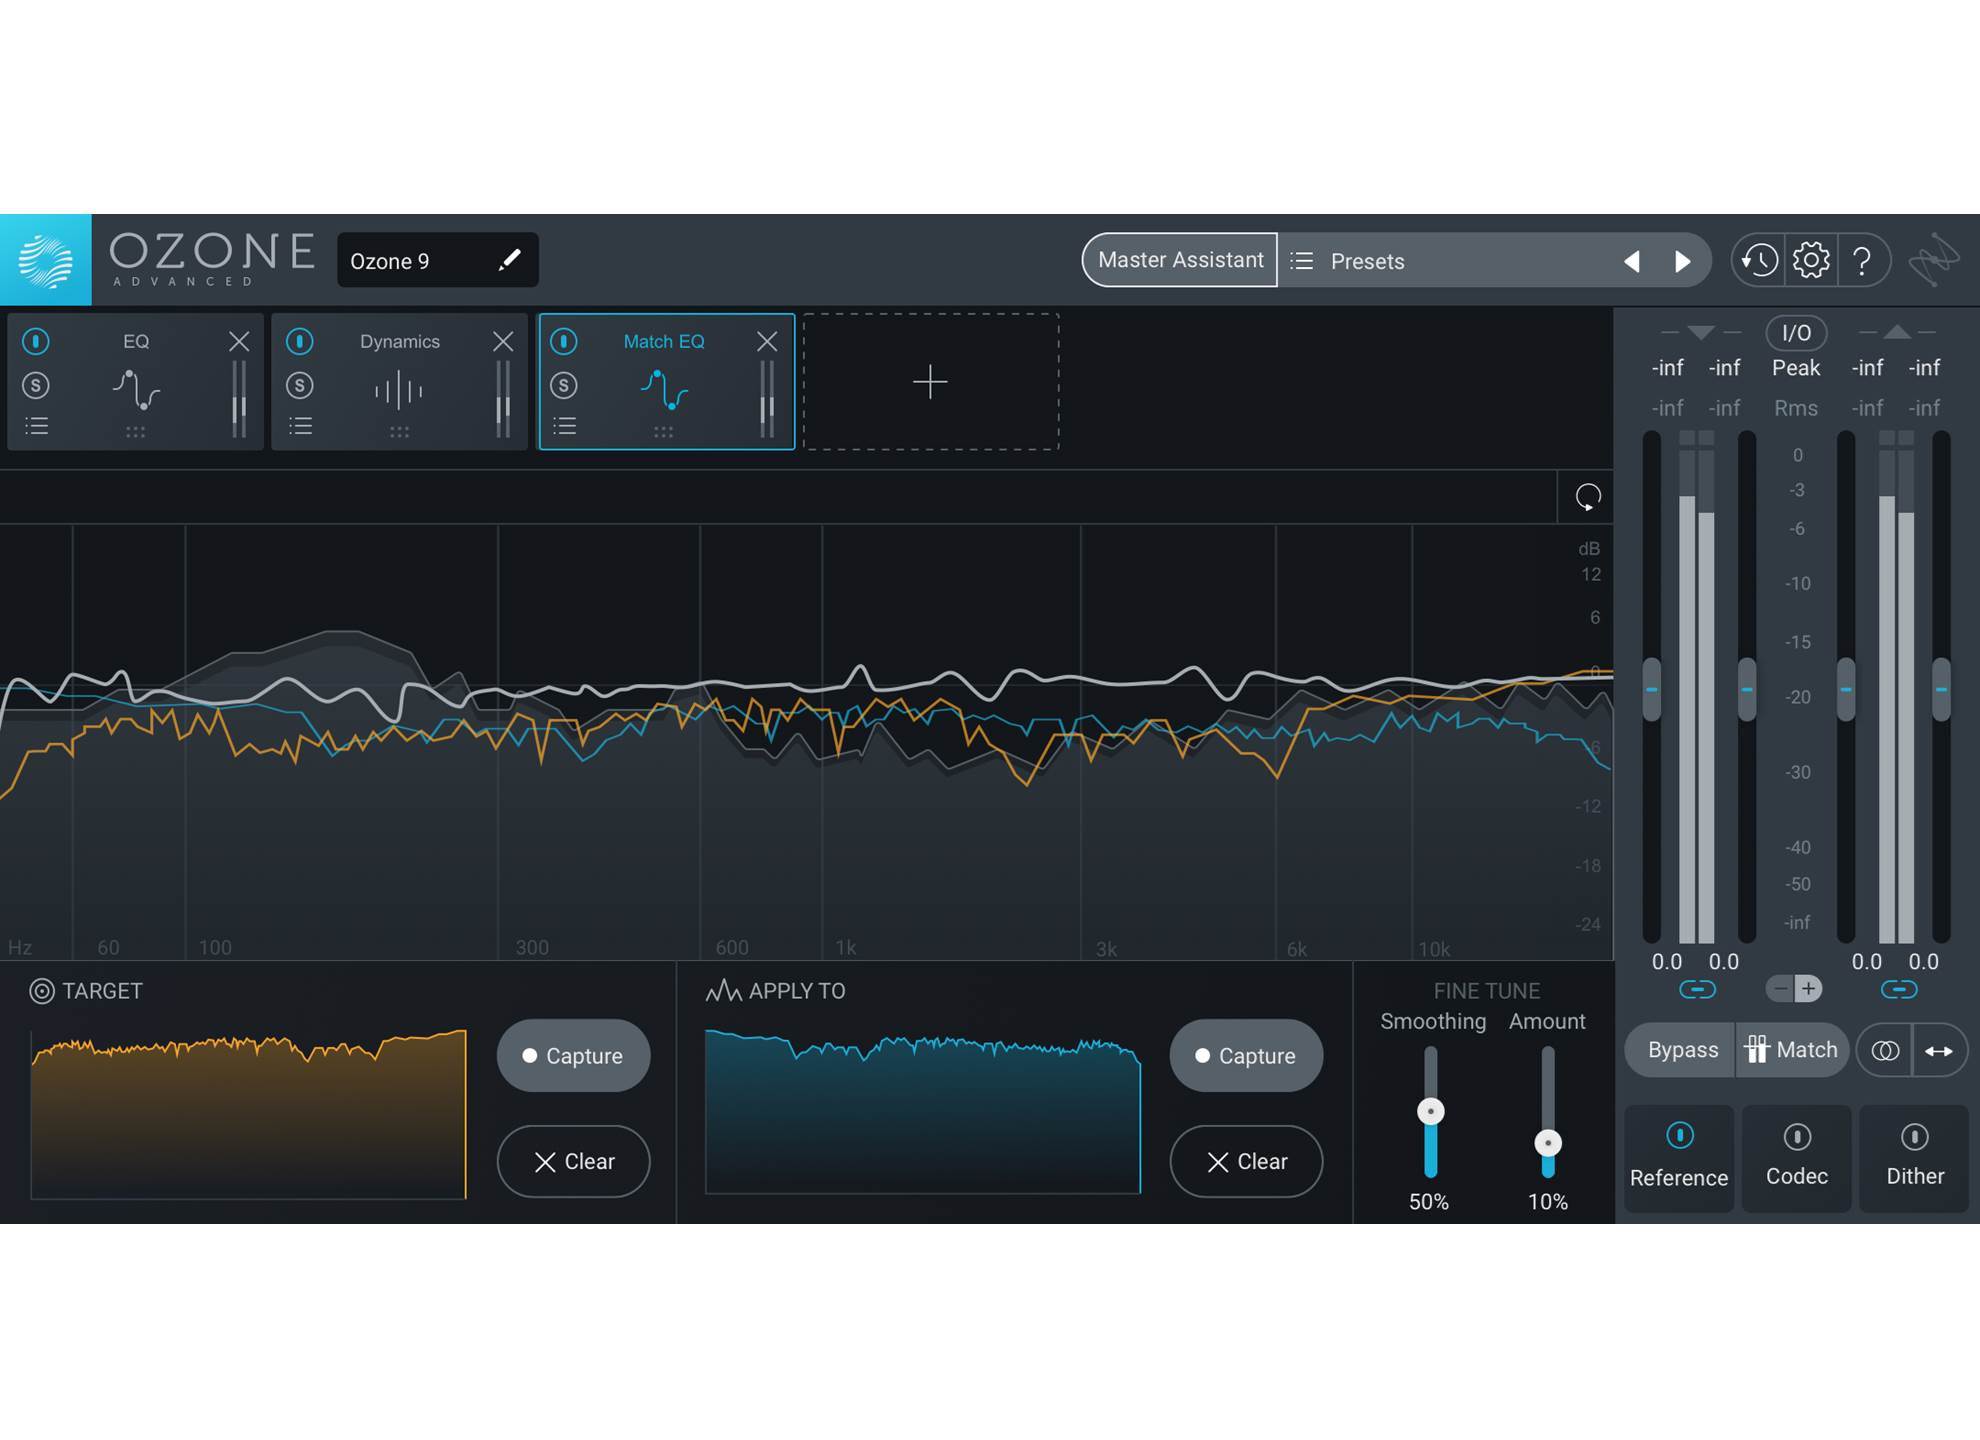 download the last version for ios iZotope Tonal Balance Control 2.7.0